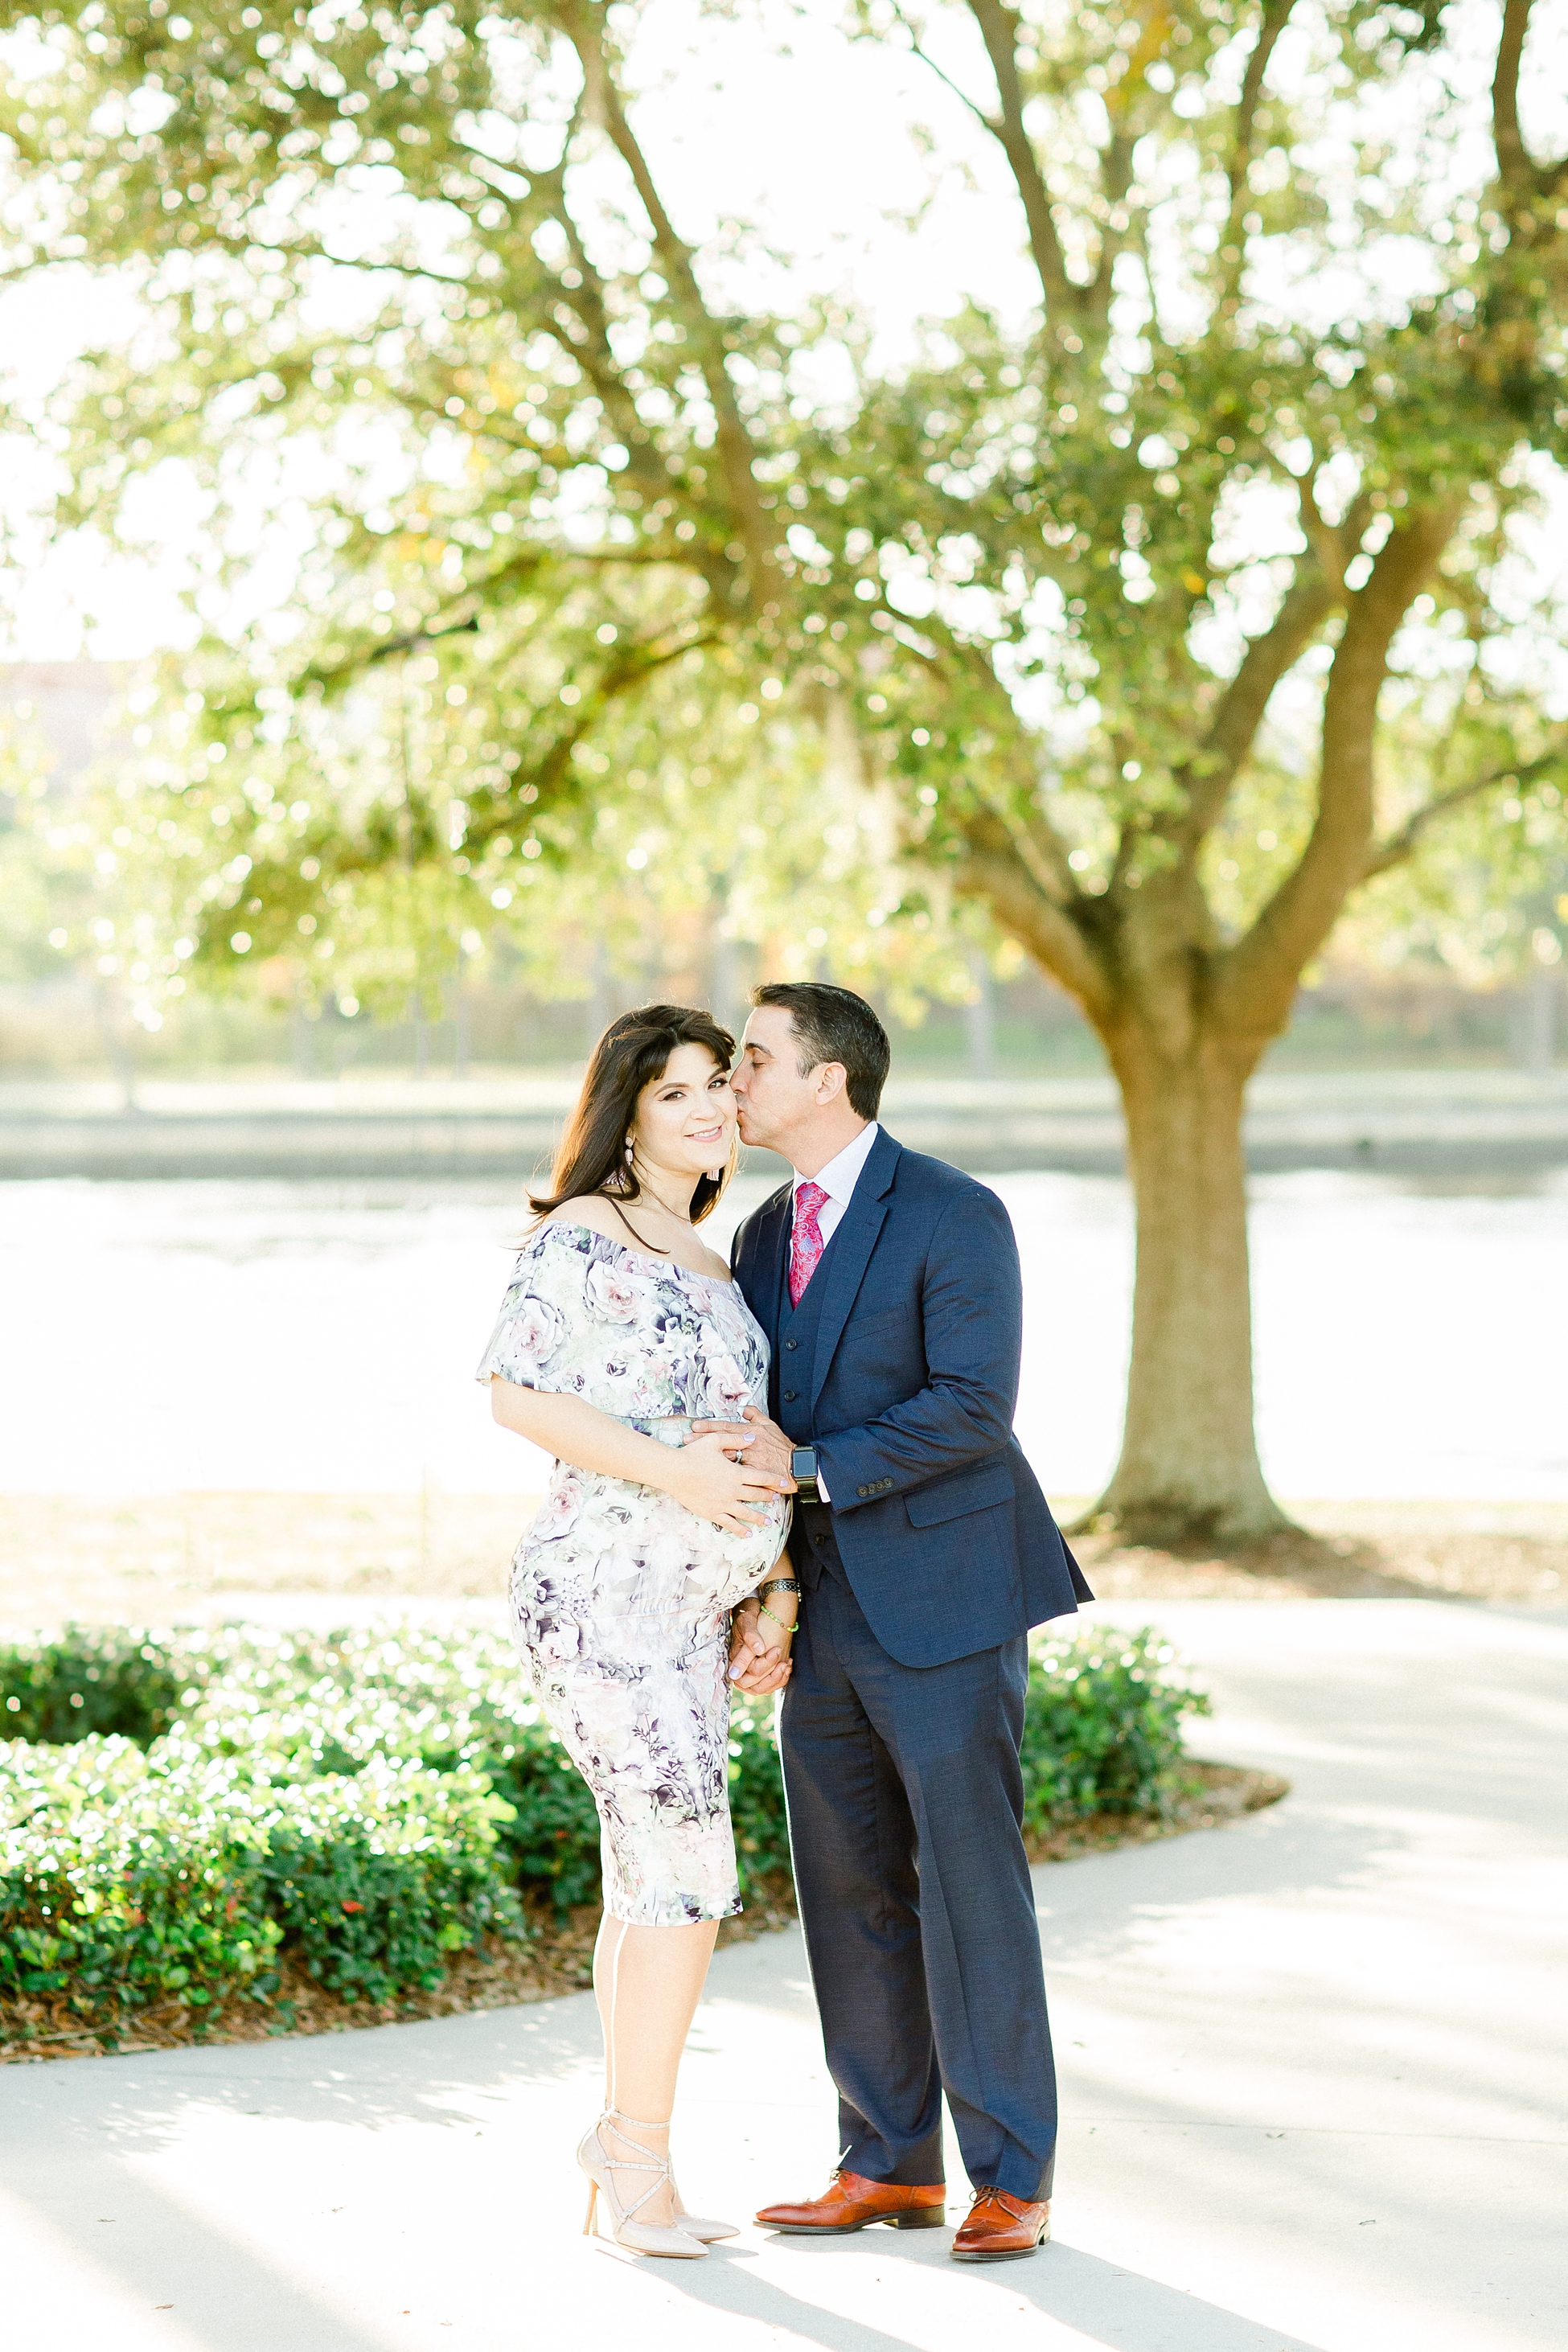 Tampa Maternity | © Ailyn La Torre Photography 2019